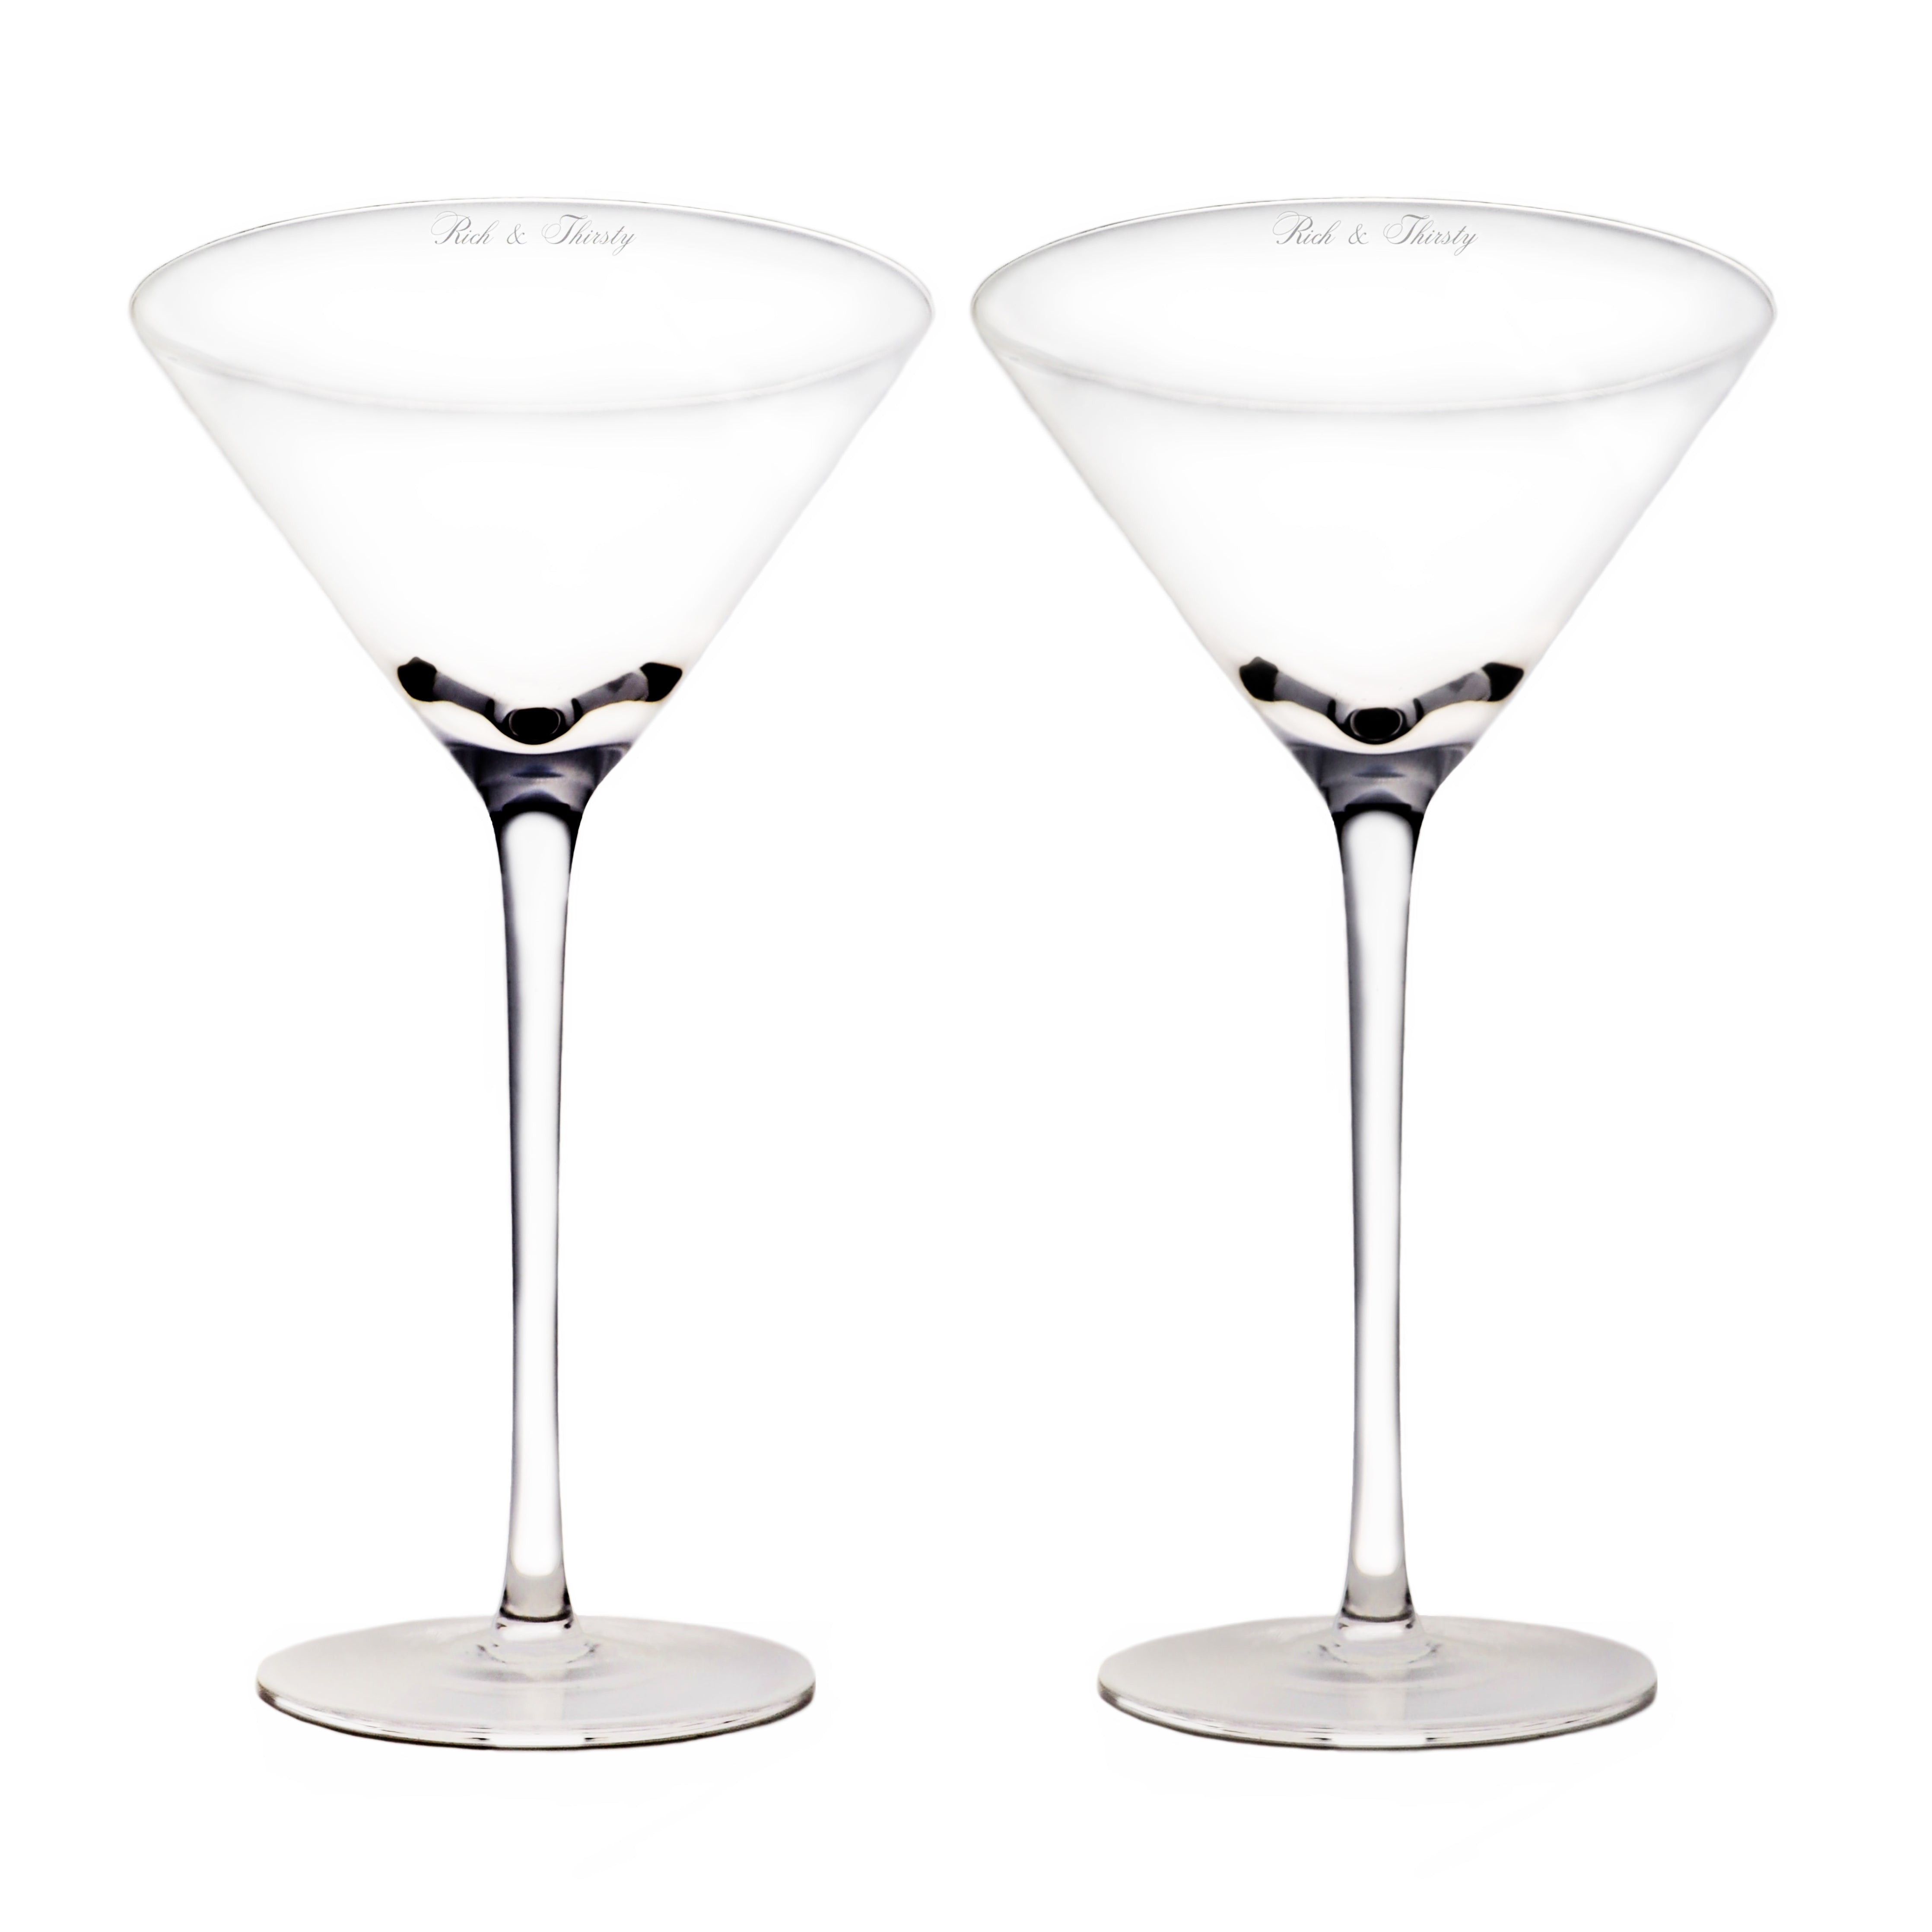 Martini Glasses Set of 4, Hand-blown Crystal Cocktail Glasses for Espresso